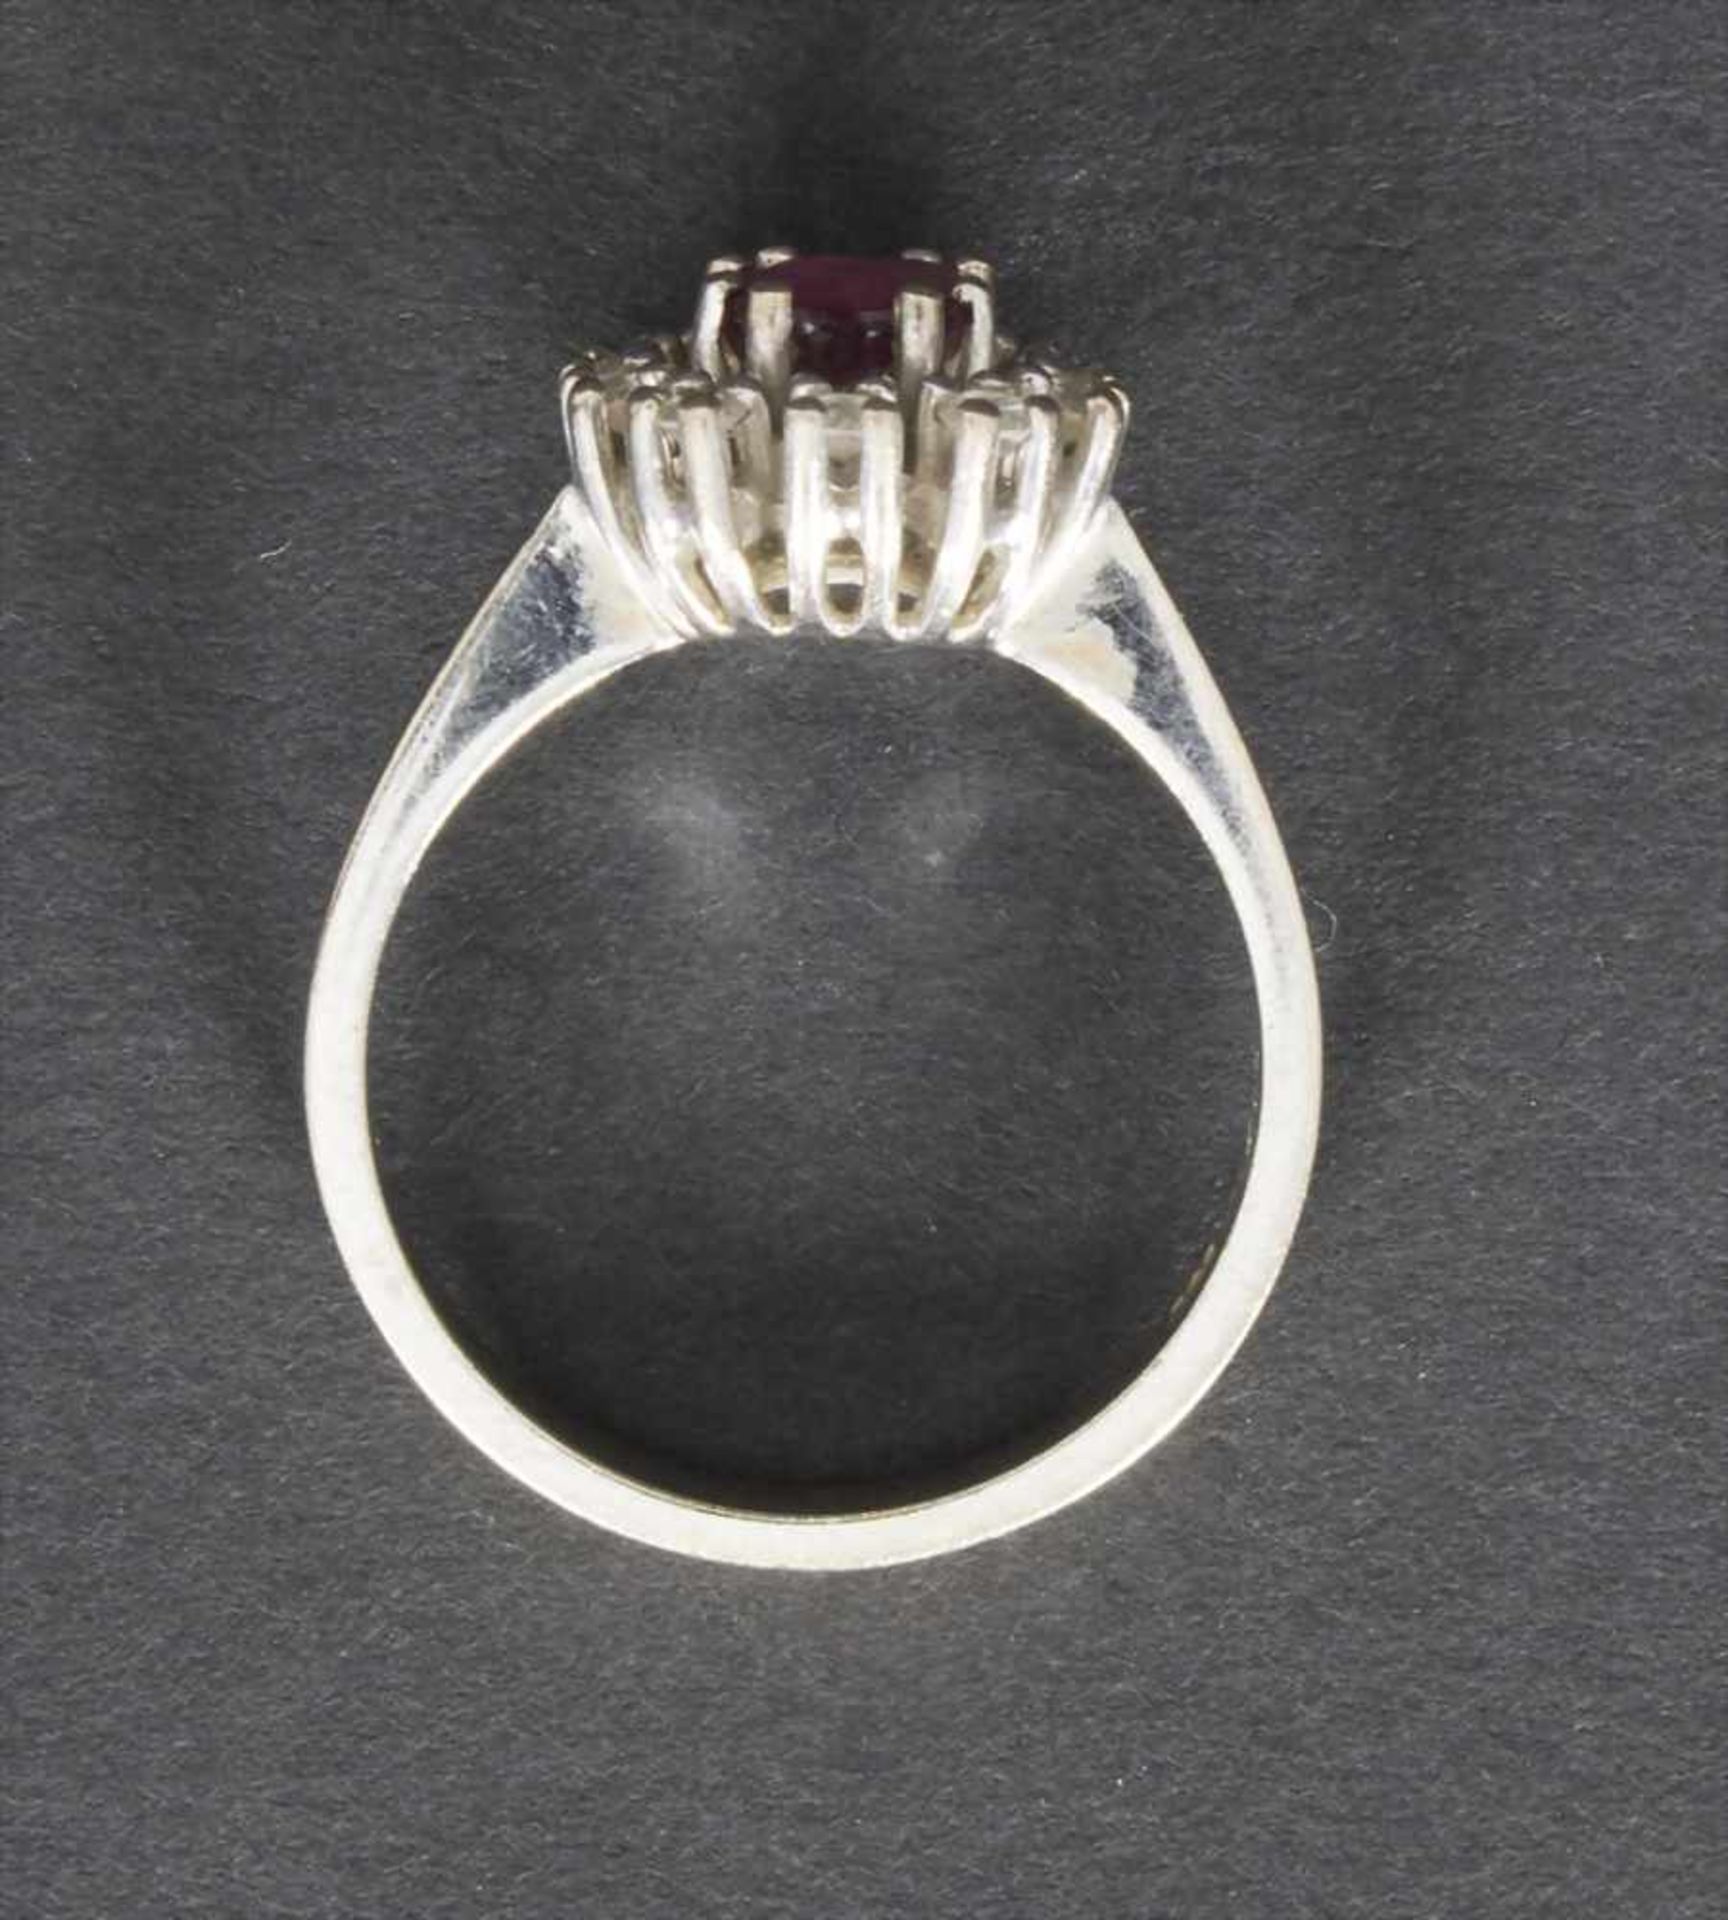 Damenring mit Diamanten und Rubin / A ladies ring with diamonds and red rubyMaterial: WG 585/000, - Image 2 of 3